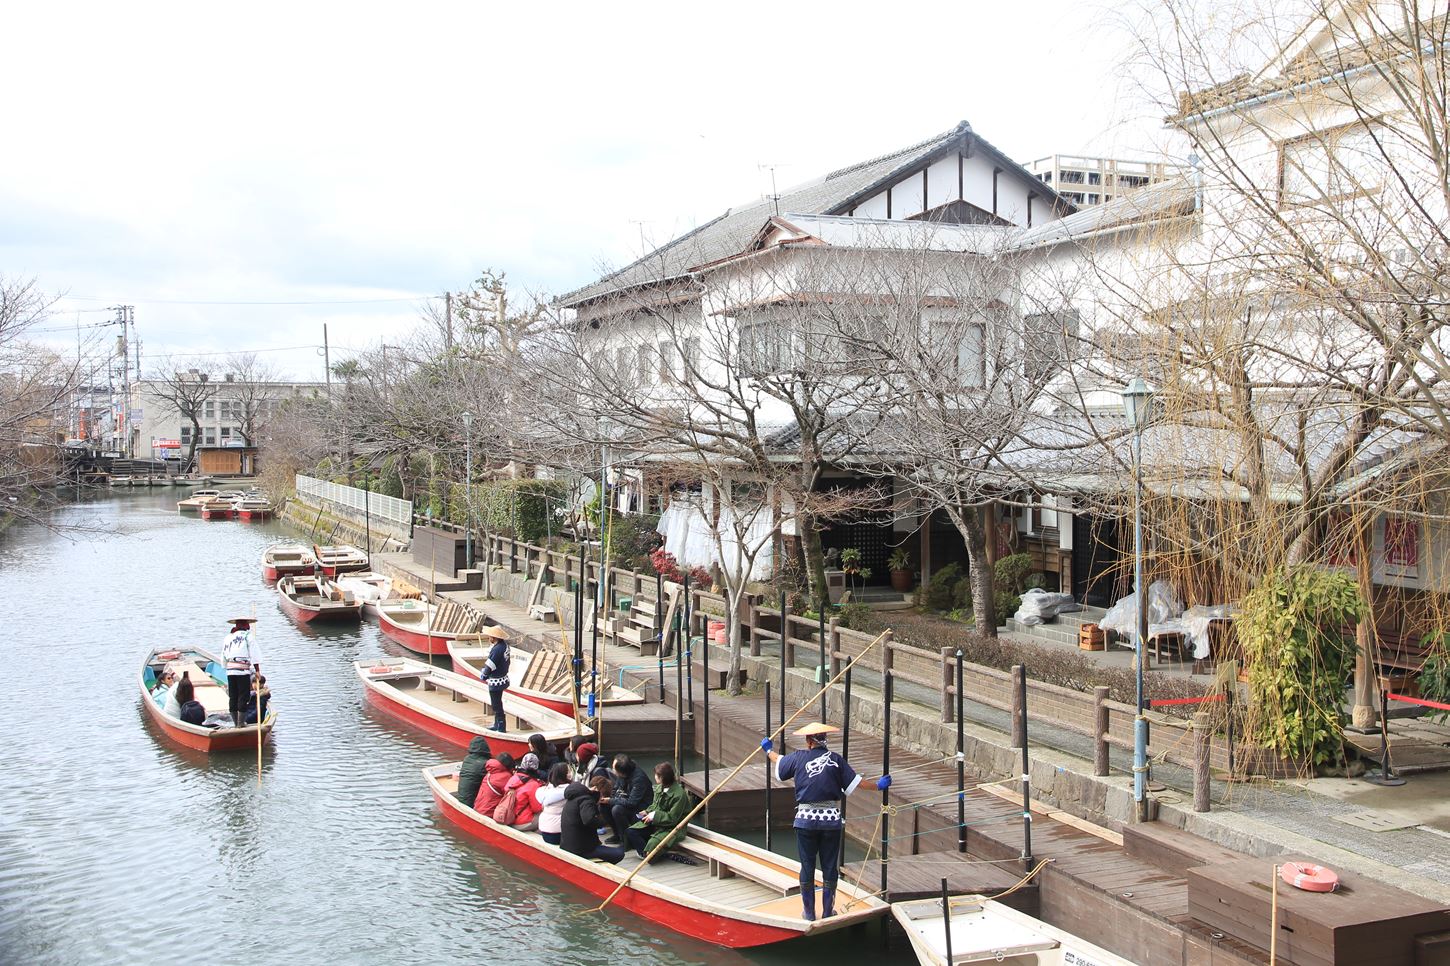  People Waiting for a Boat Ride. Yanagawa is a famous canal town in Kyushu island = Shutterstock